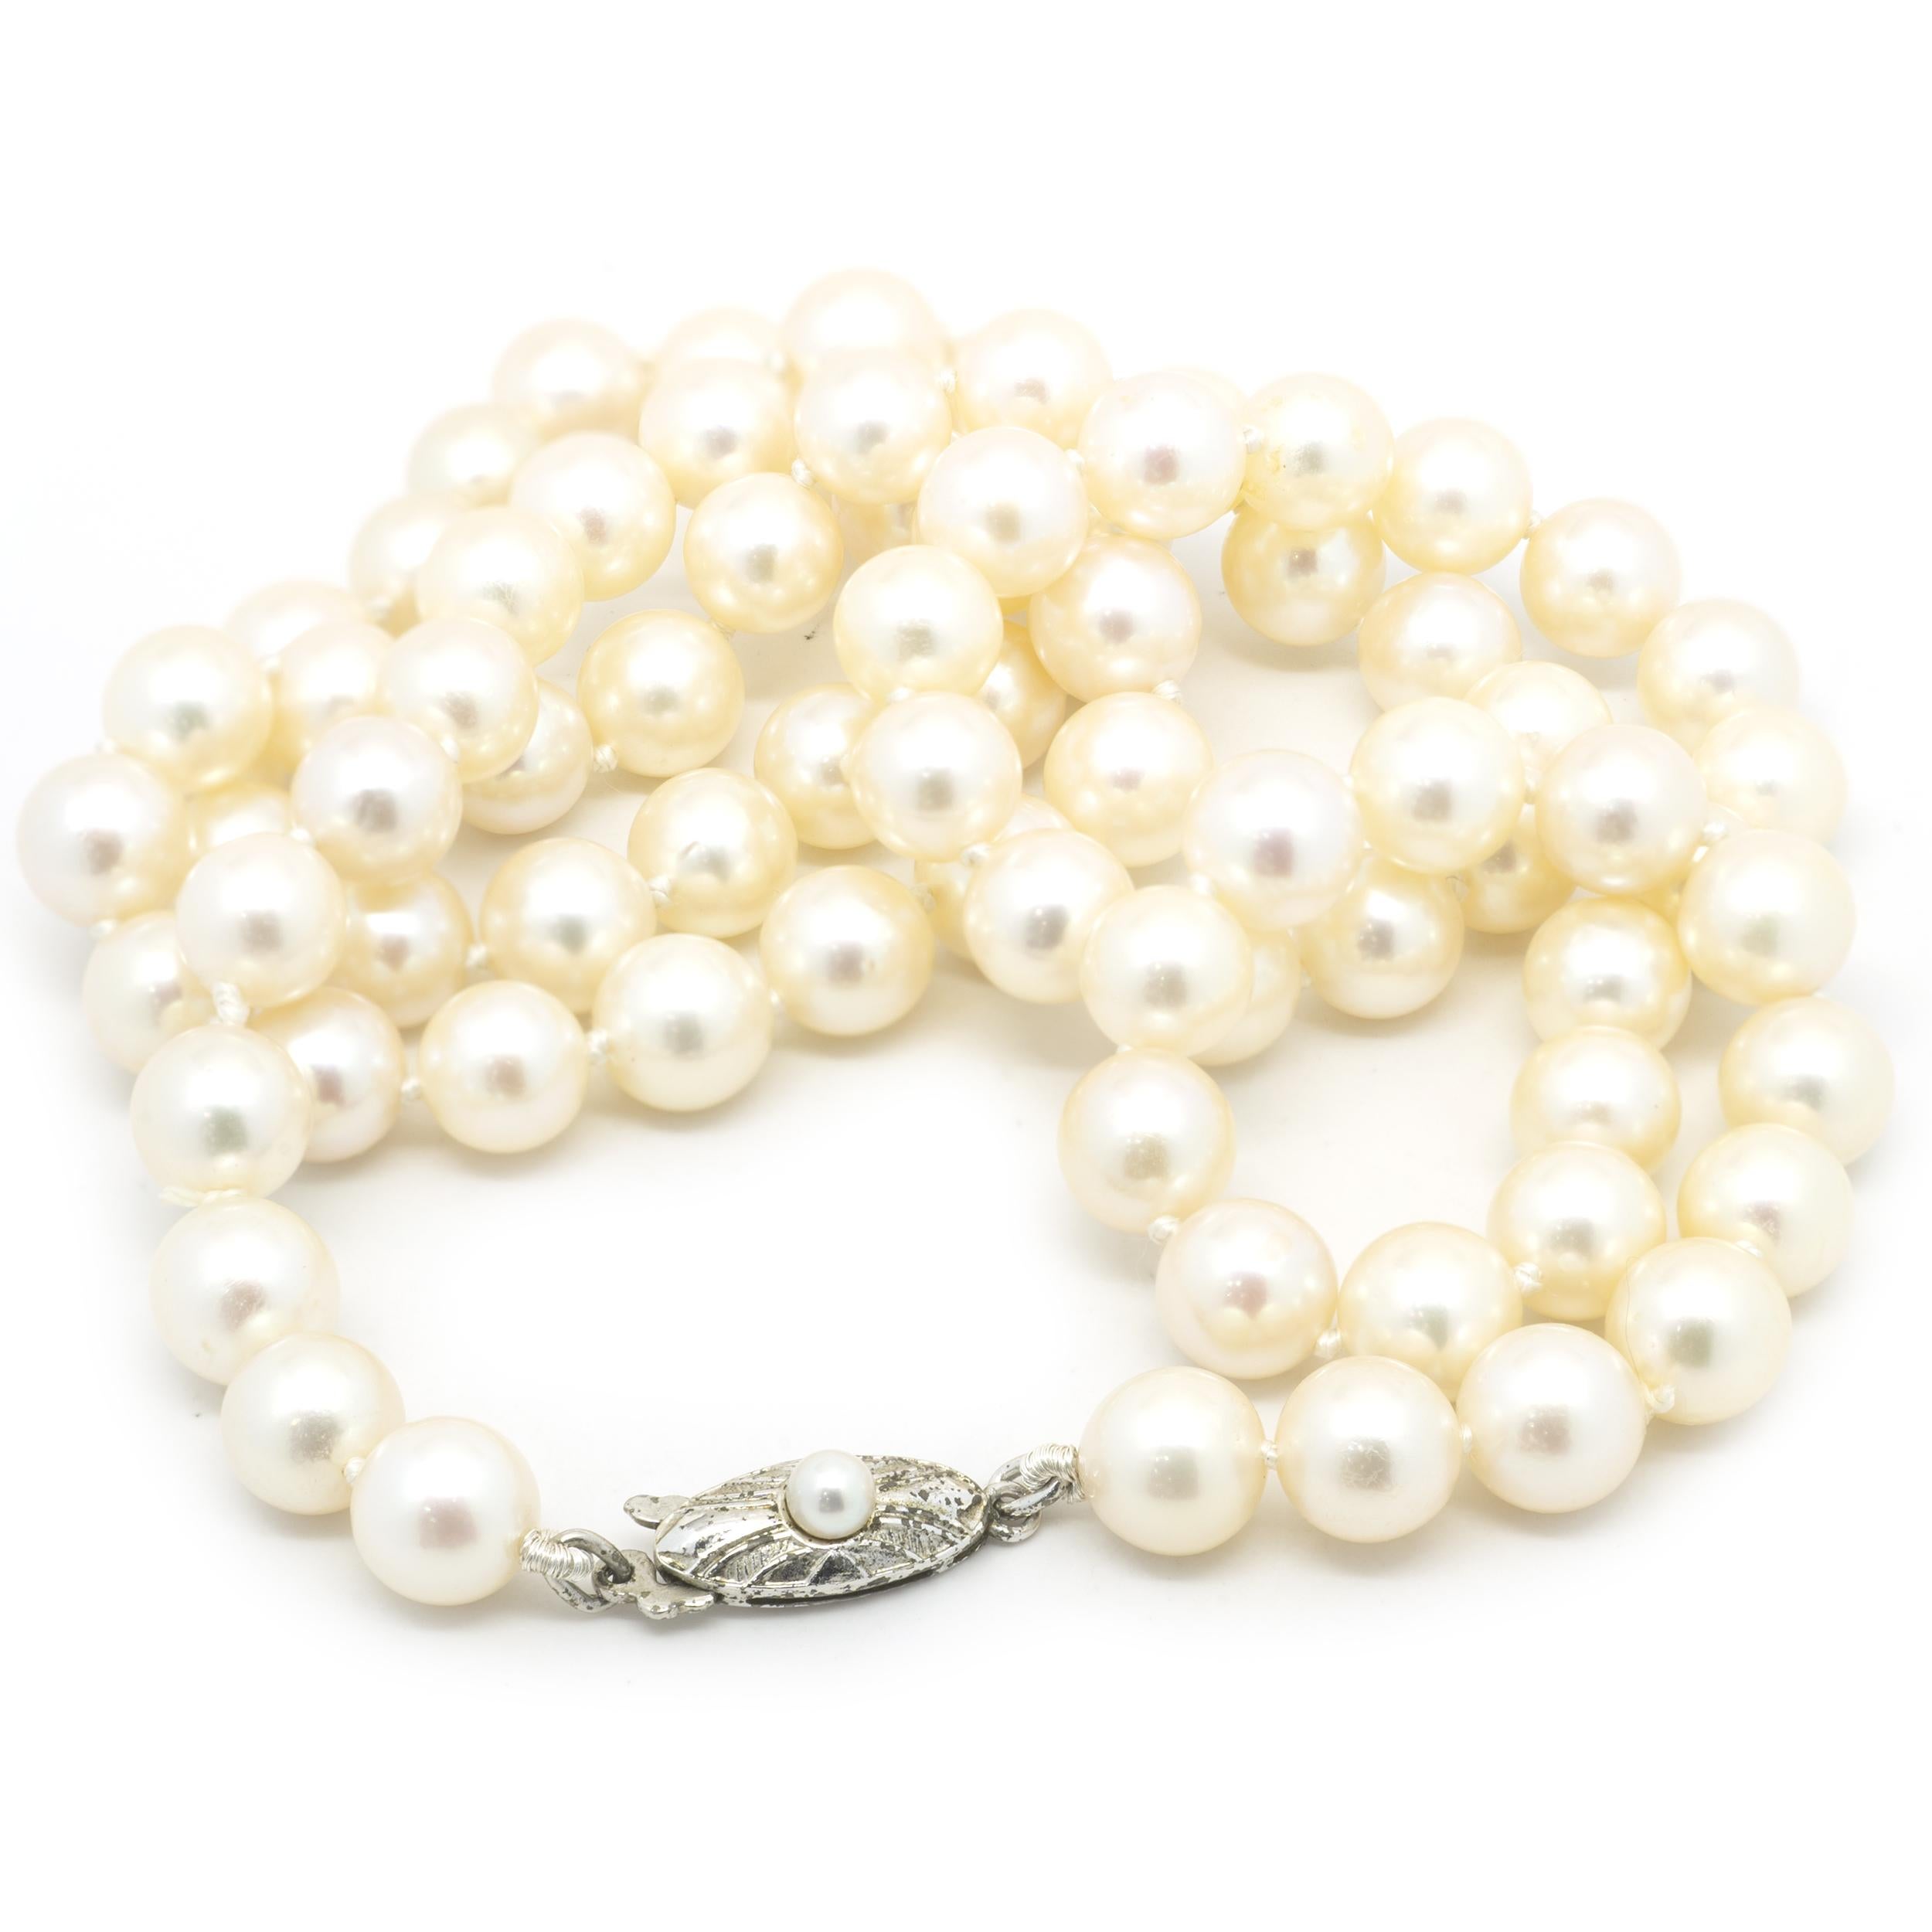 Designer: Custom
Material: sterling silver
Pearl: 6.5-6.8mm Akoya Cultured
Dimensions: necklace measures 24-inches in length
Weight: 35.26 grams
